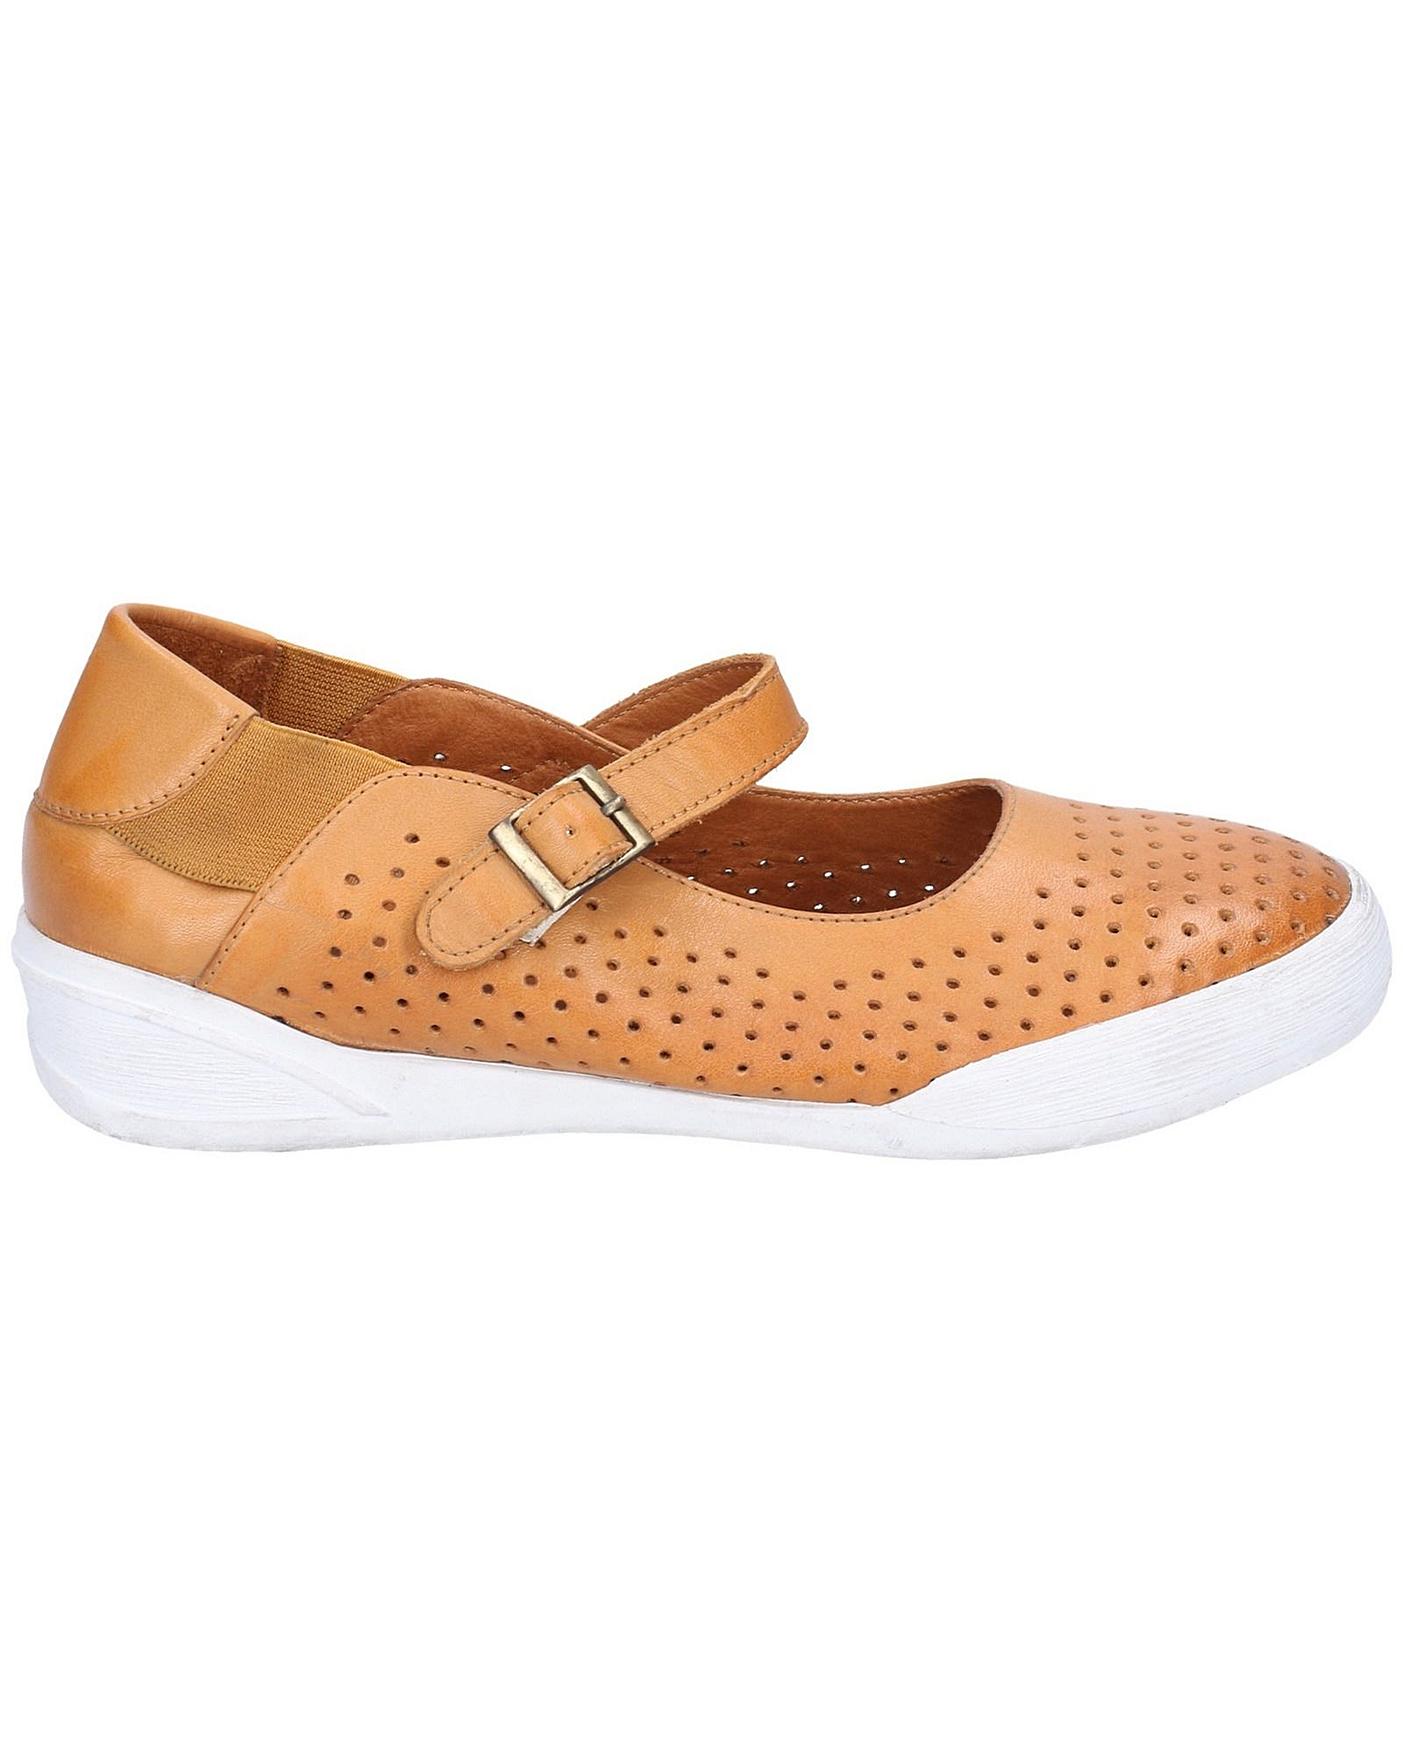 hush puppies buckle shoes